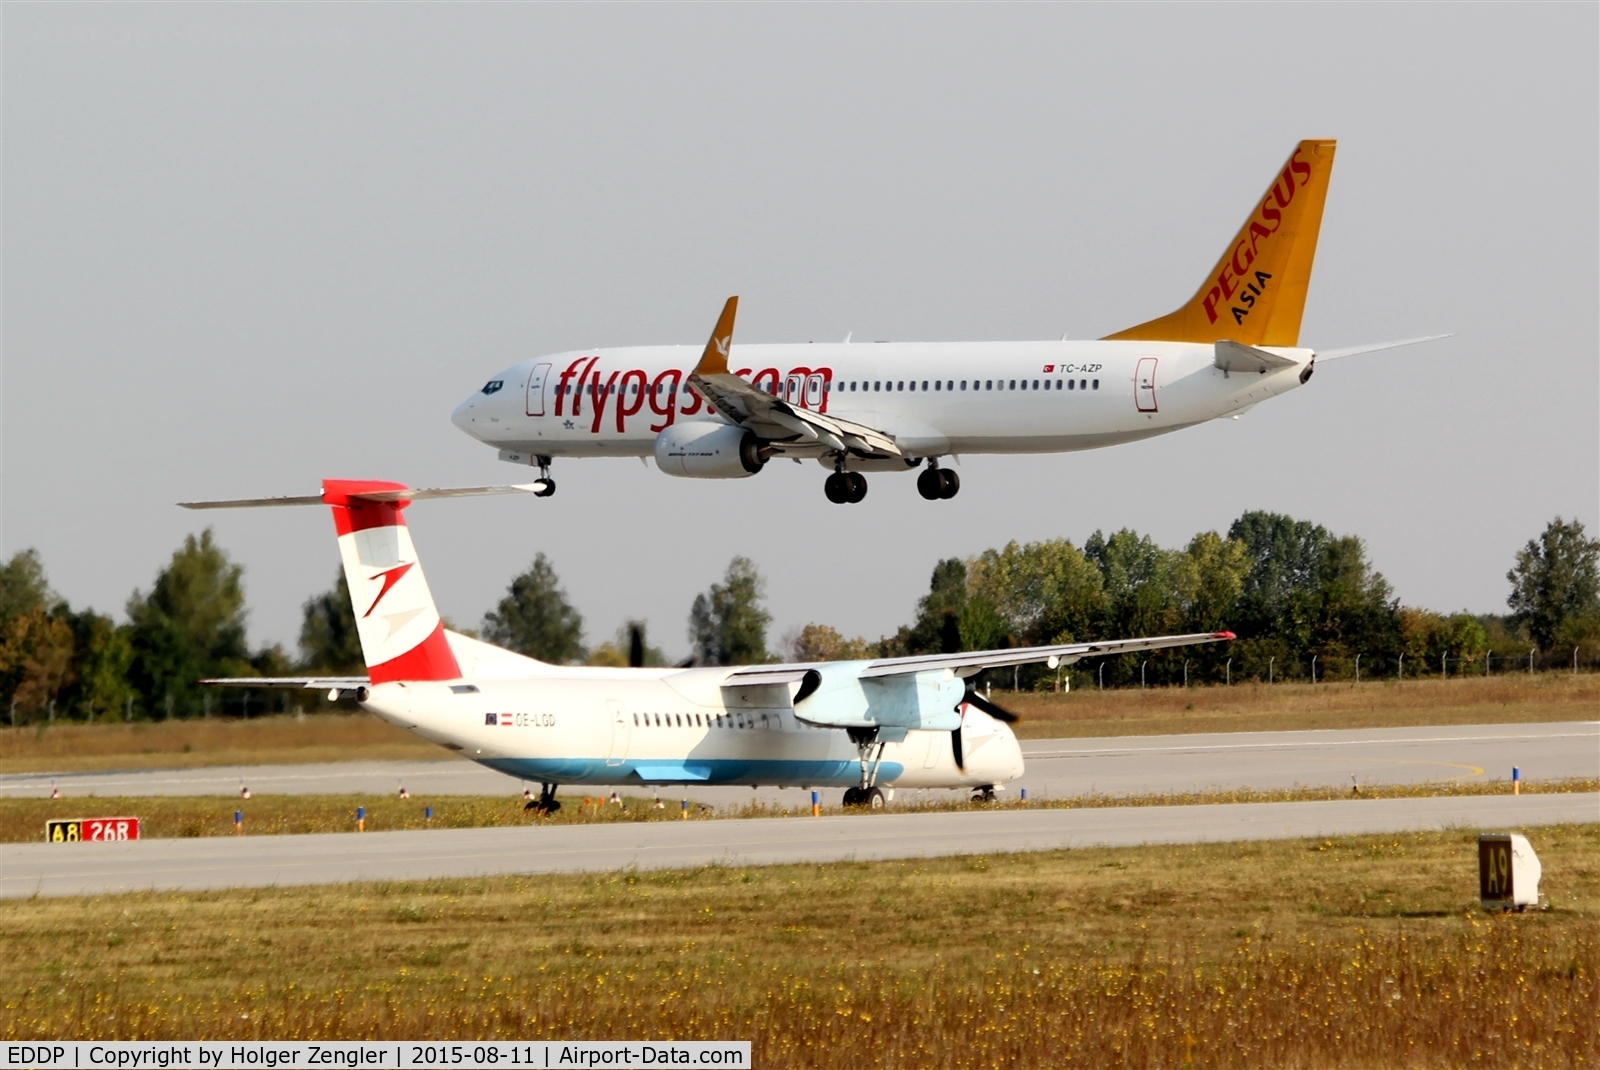 Leipzig/Halle Airport, Leipzig/Halle Germany (EDDP) - Coming and going at rwy 26R/twy A8 junction....